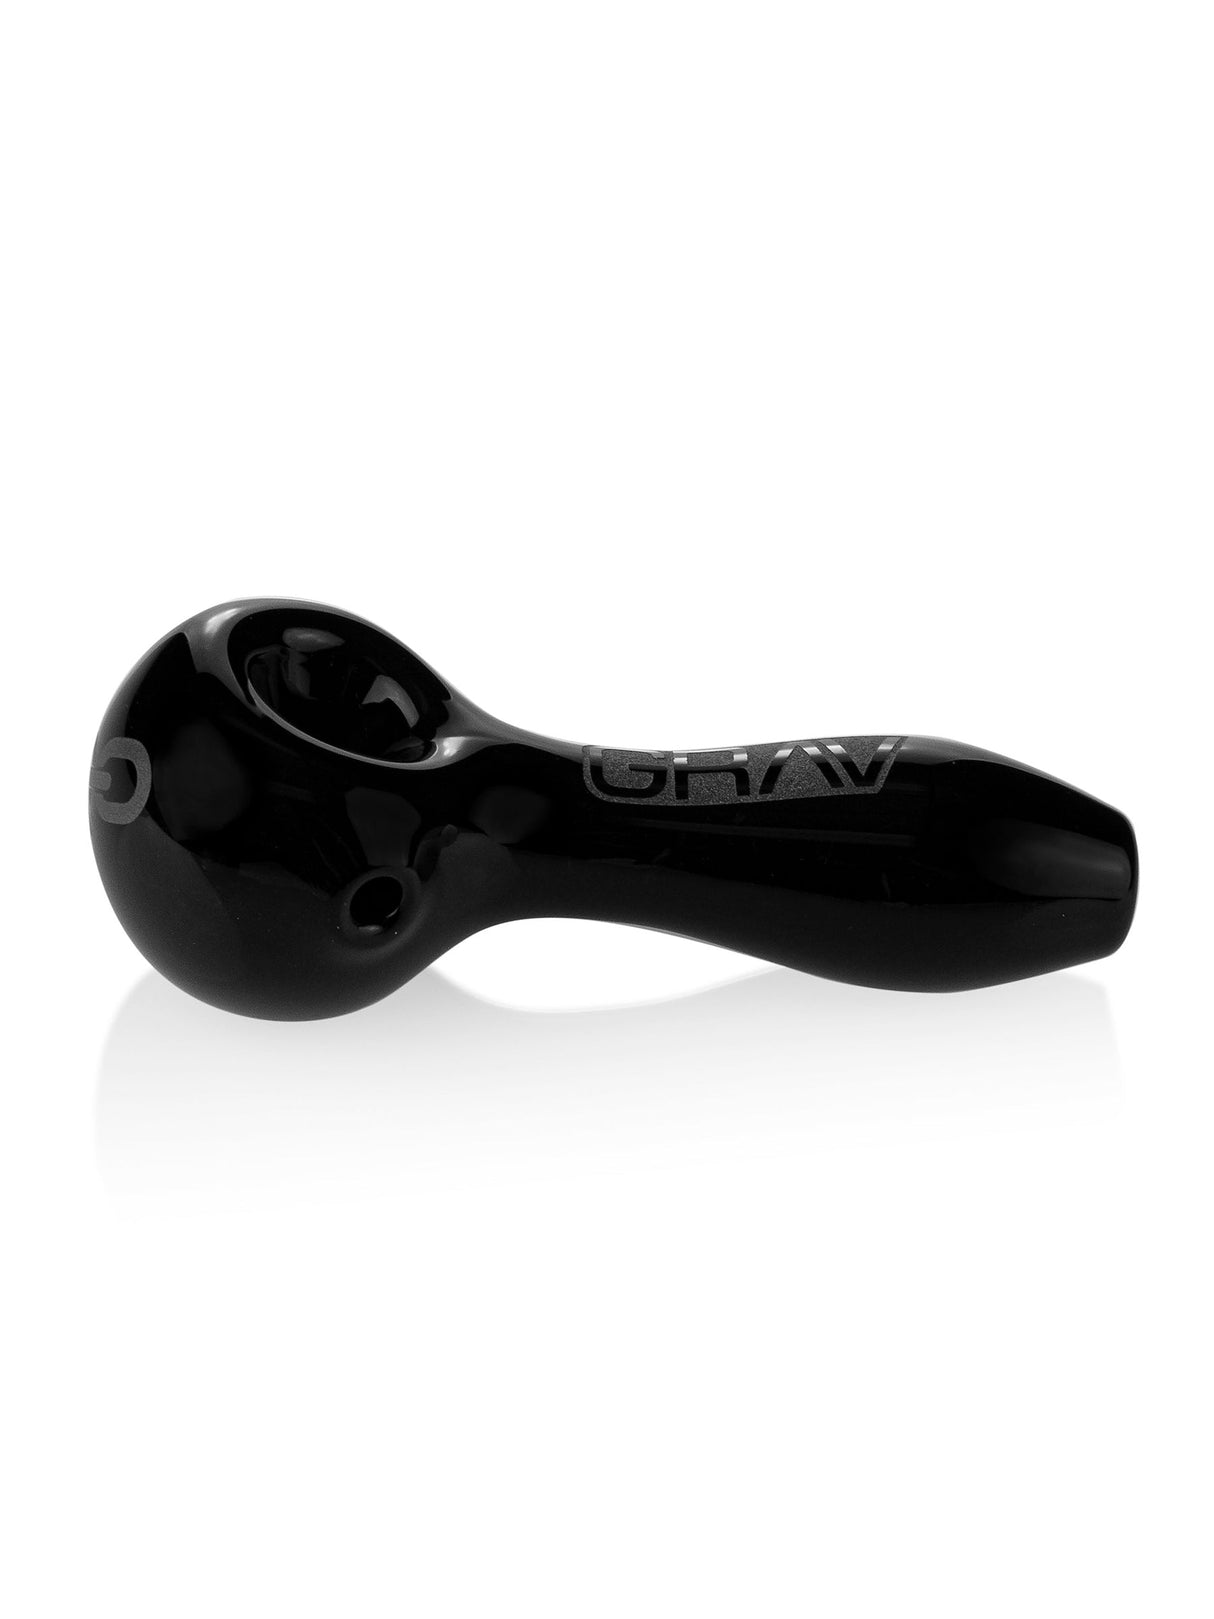 GRAV Classic Spoon Pipe in Black - Compact and Portable Design - Side View